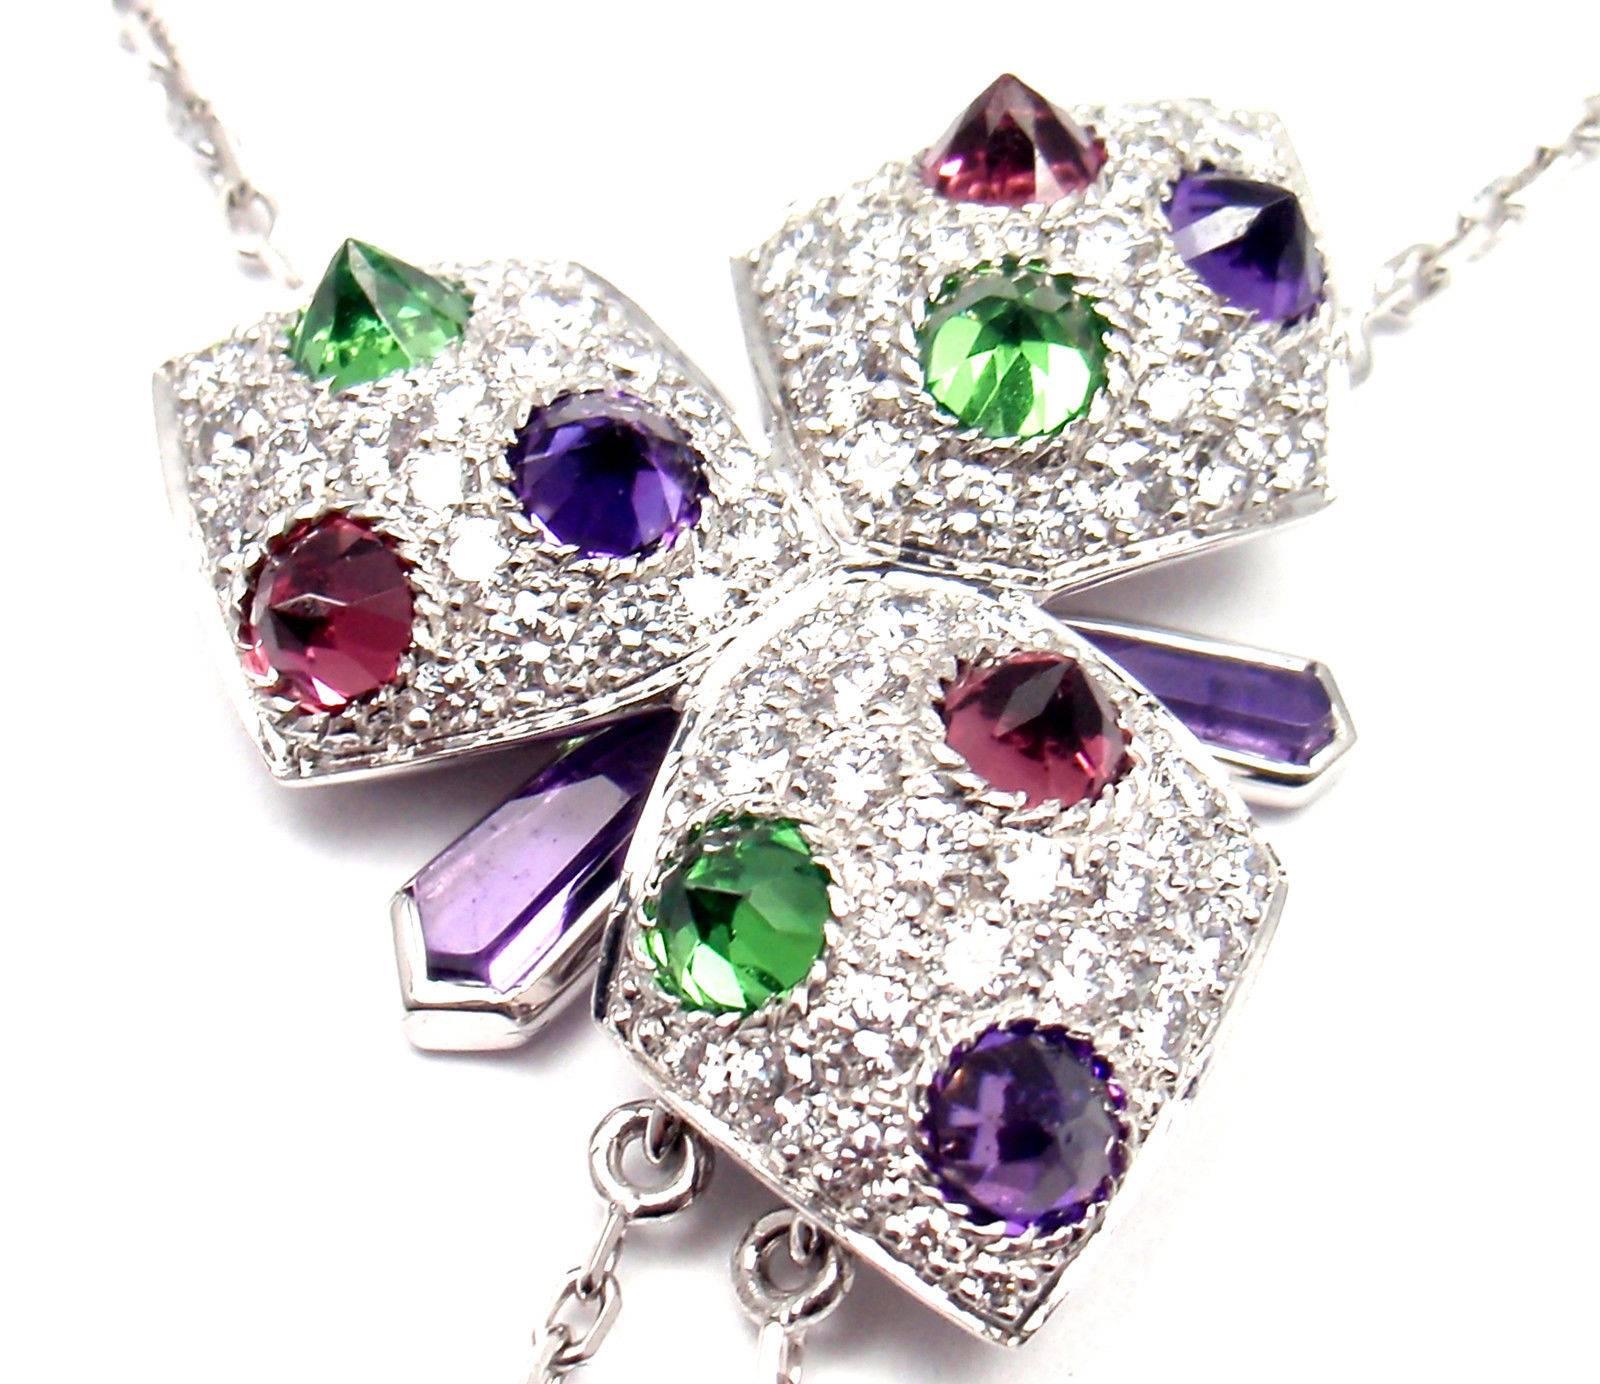 18k White Gold Caresse D'orchidées Orchid Diamond Amethyst Tourmaline Necklace by Cartier.
With 135 Round Brilliant Cut Diamonds VVS1 clarity, E color total weight approx. 1.75ct
11 amethysts
11 favorites
5 pink tourmaline
This necklace is in mint